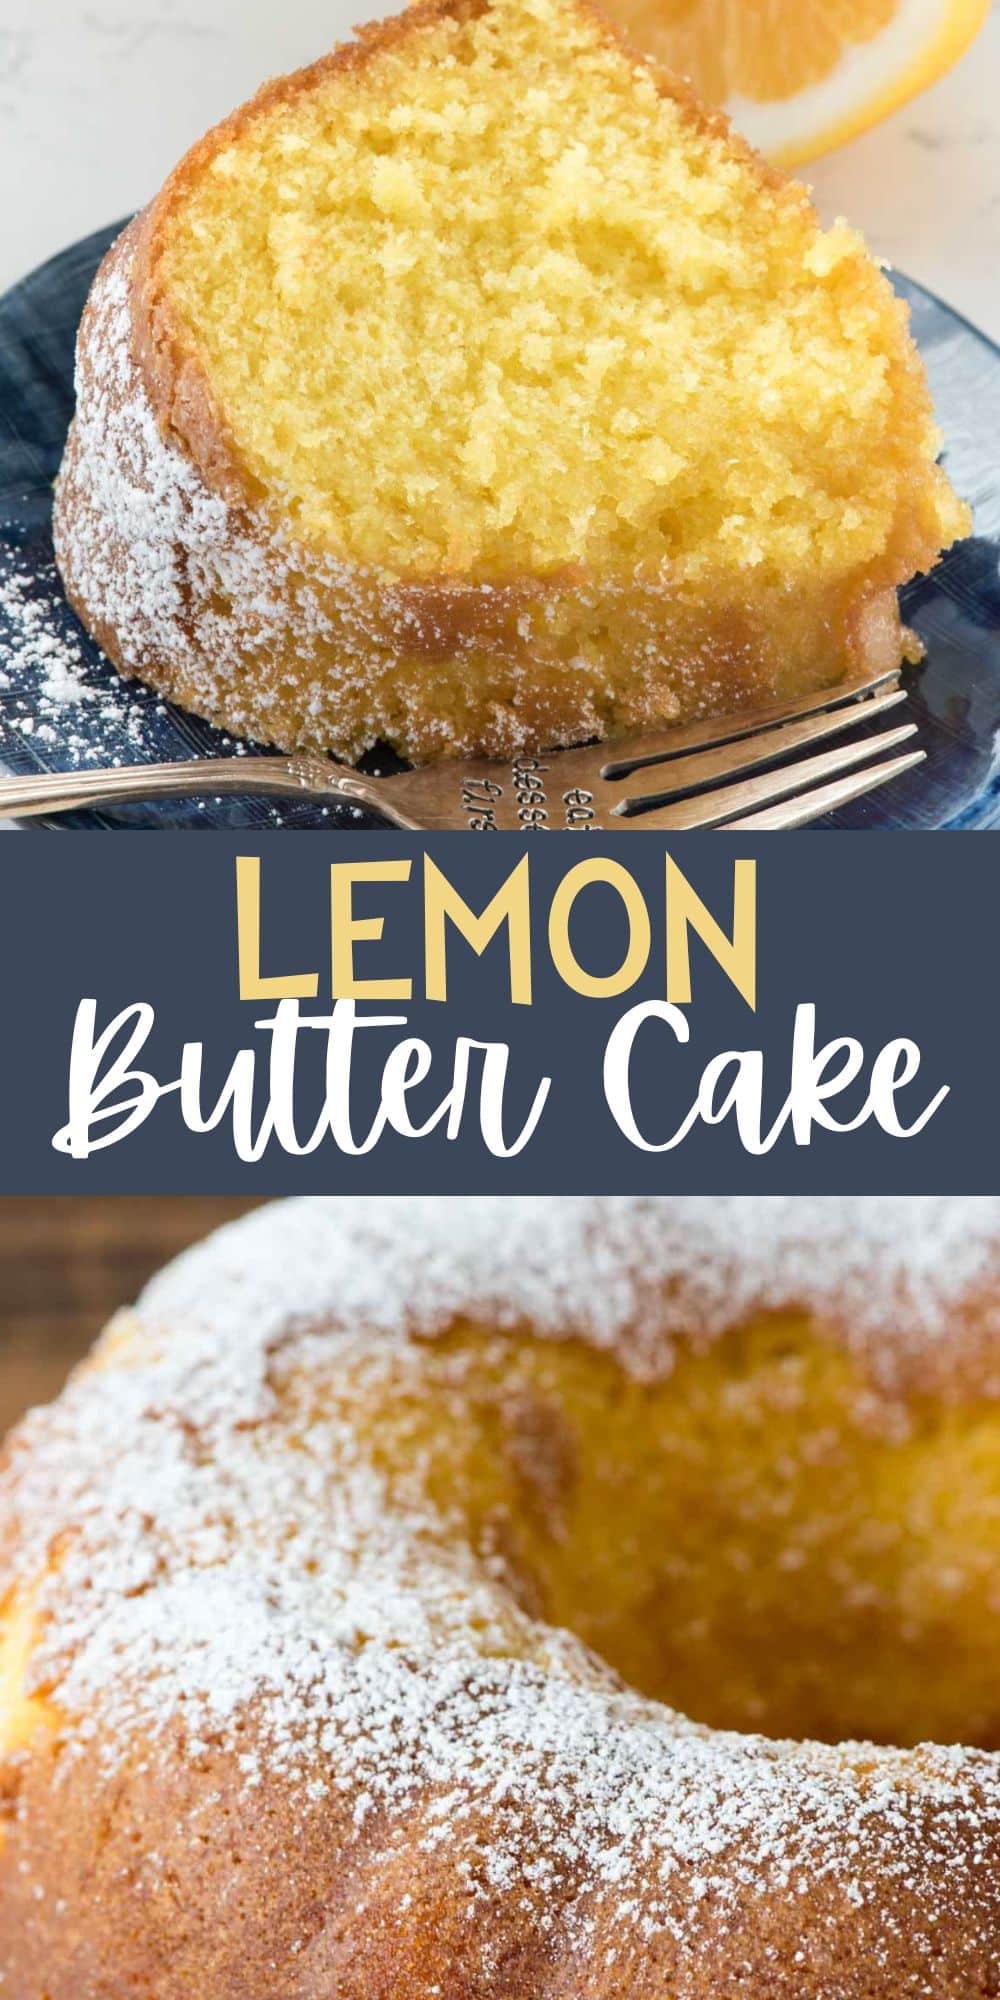 two photos of lemon butter cake sitting on a blue plate with lemon around it and words on the photo.